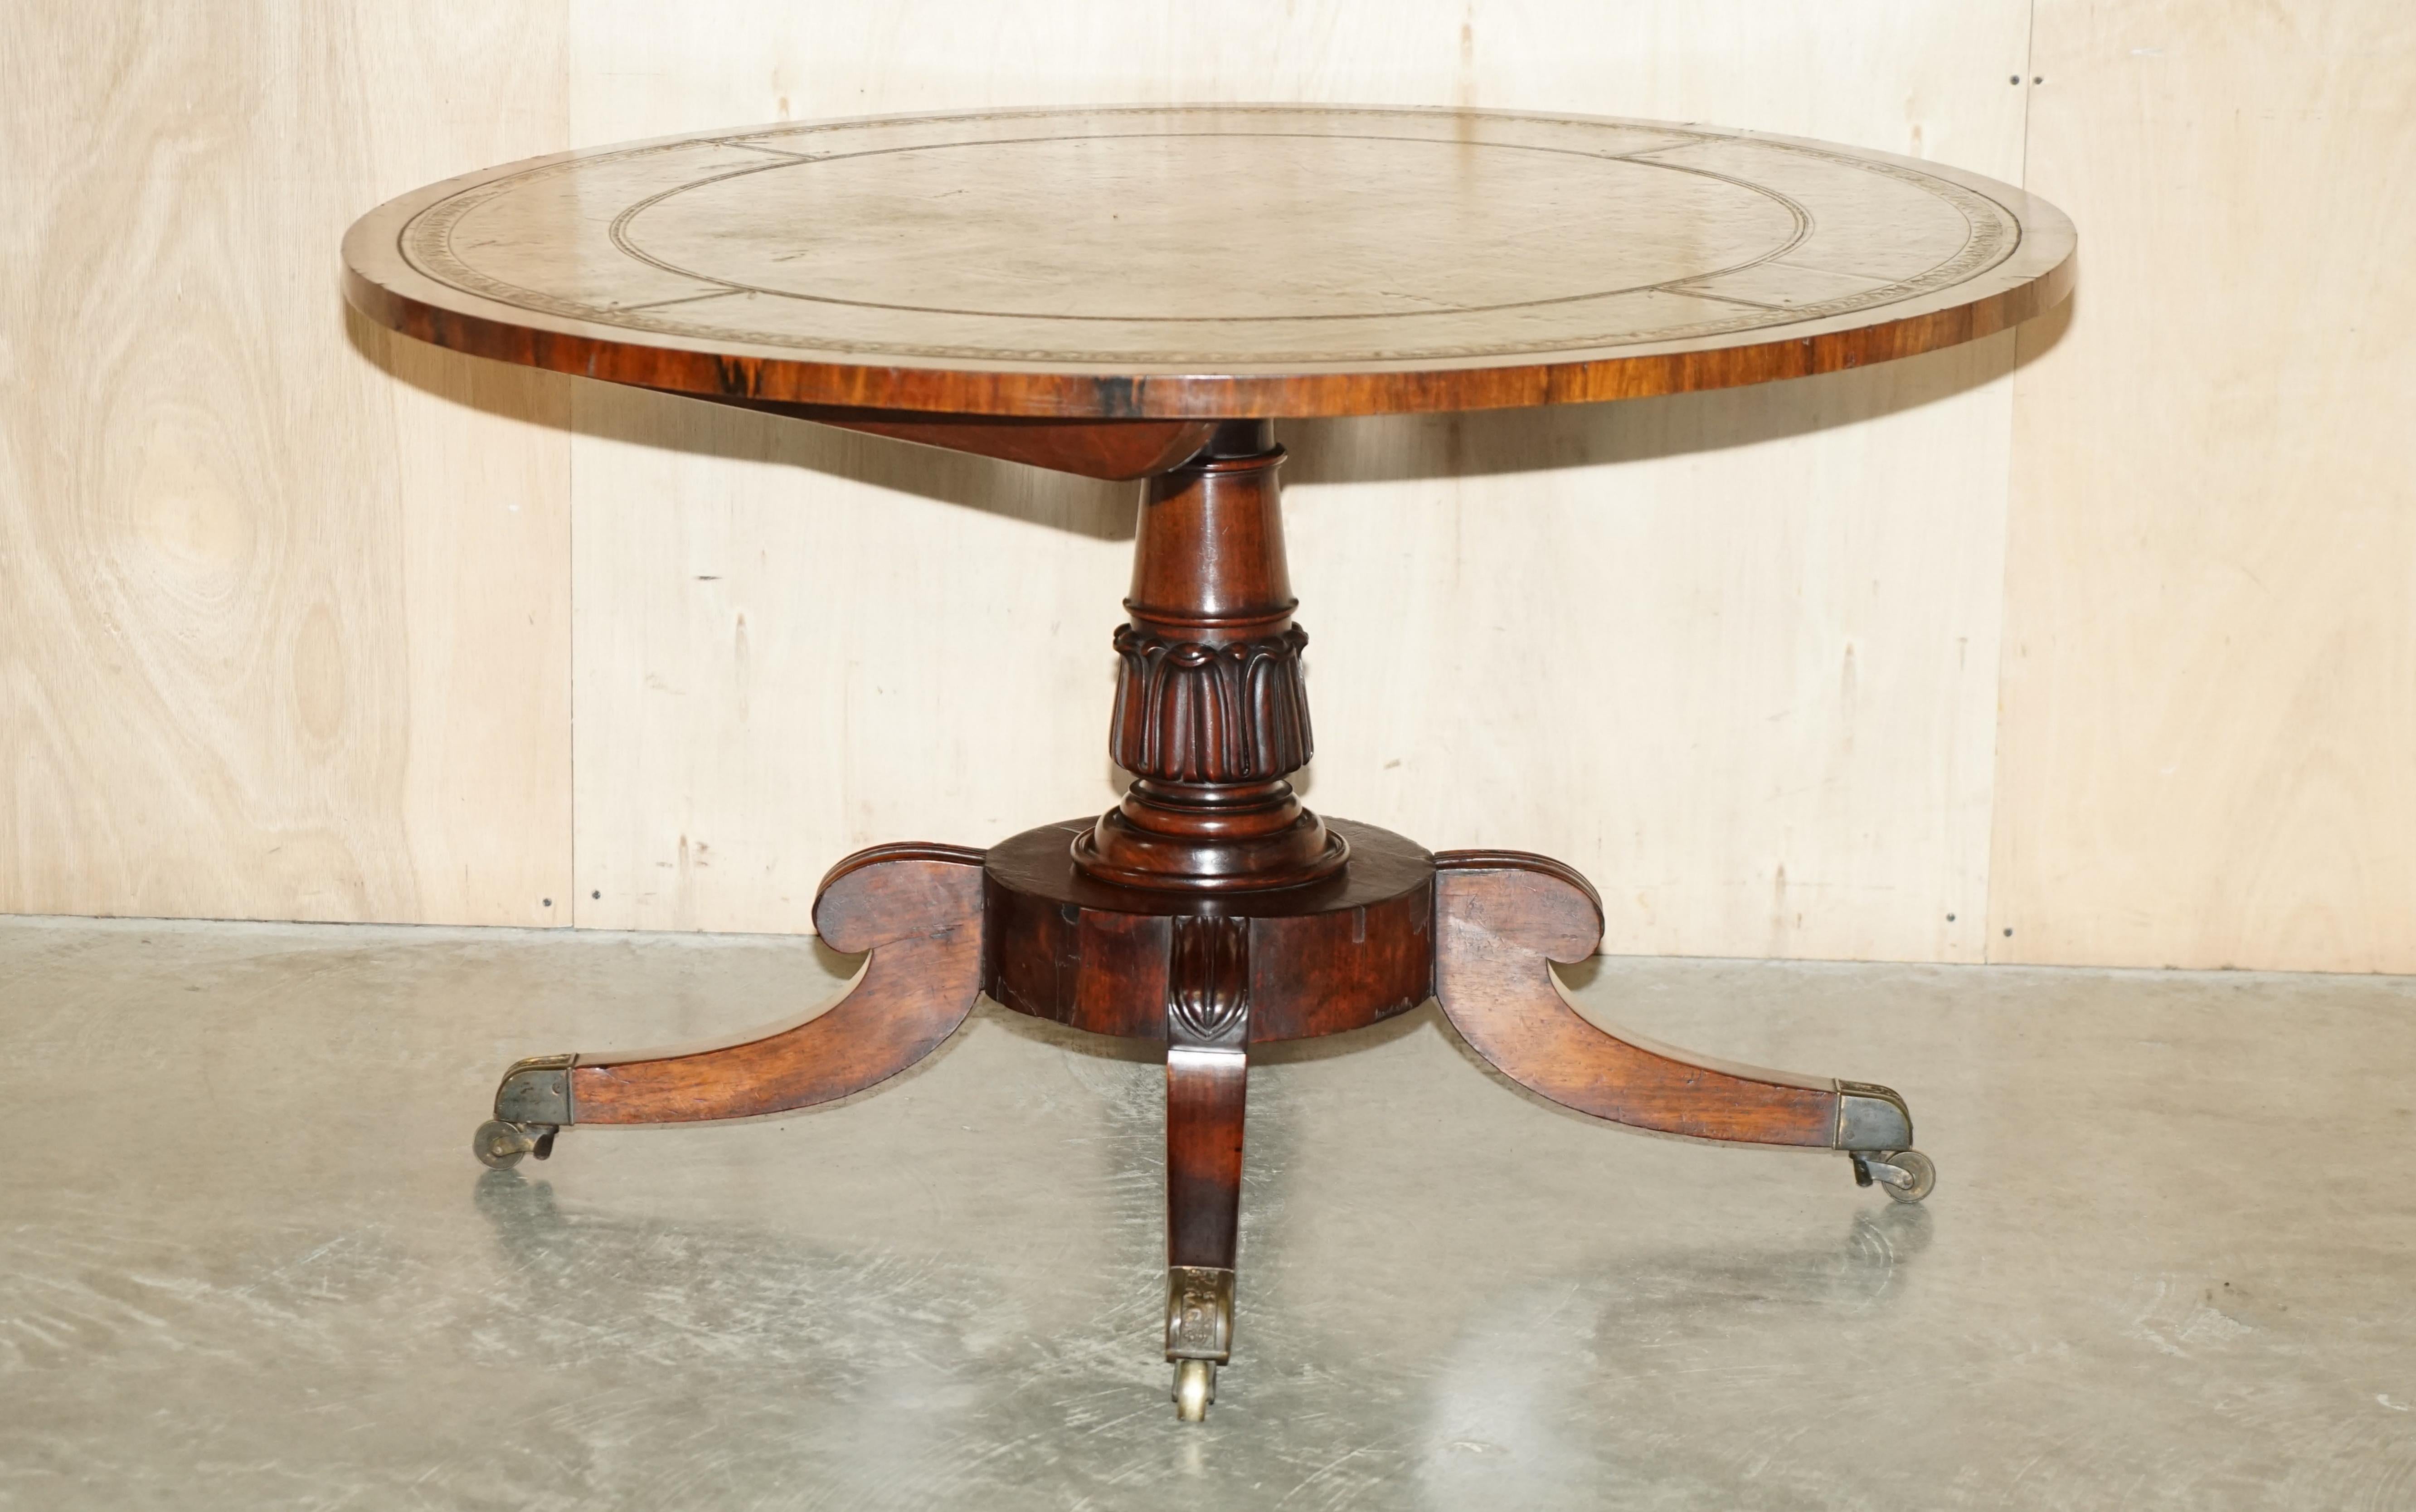 We are delighted to offer for sale this absolutely stunning original William IV Rosewood and gold leaf embossed green leather Library or dining table with ornately carved pedestal base and tilt top 

A very good looking well made and decorative